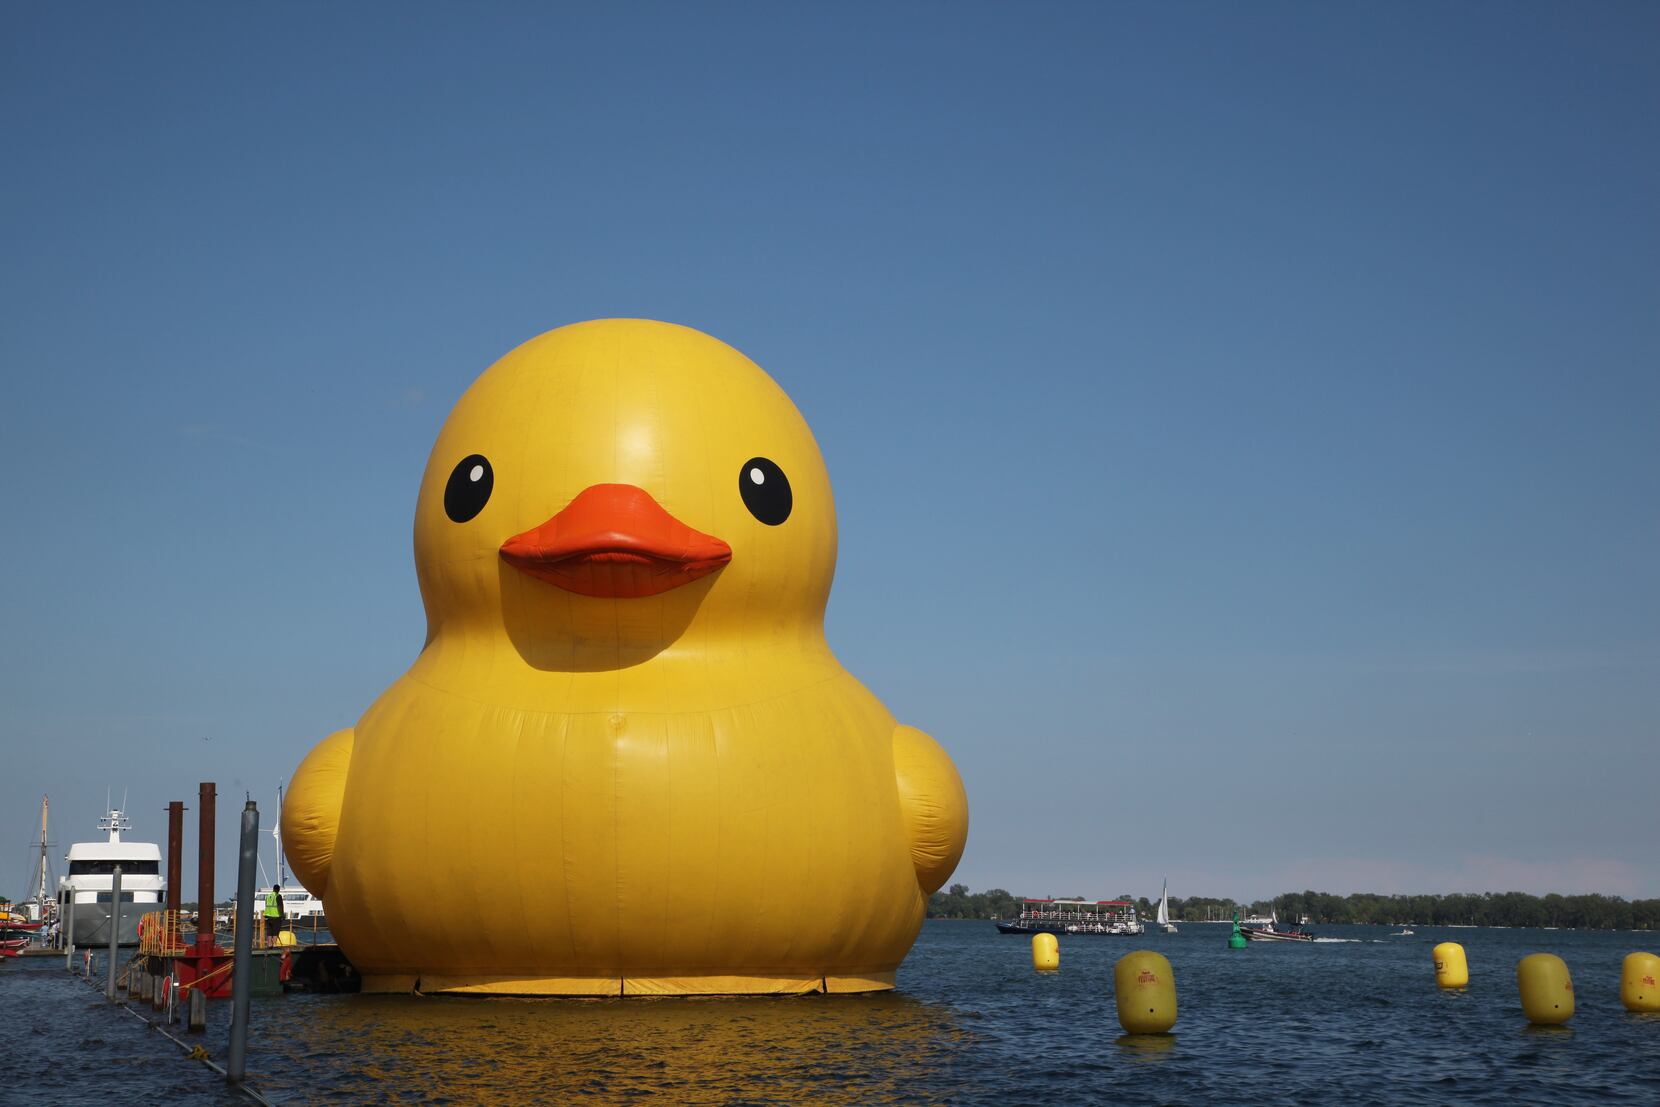 Ontario Giant Rubber Duck Is Counterfeit, Says Artist Who Created